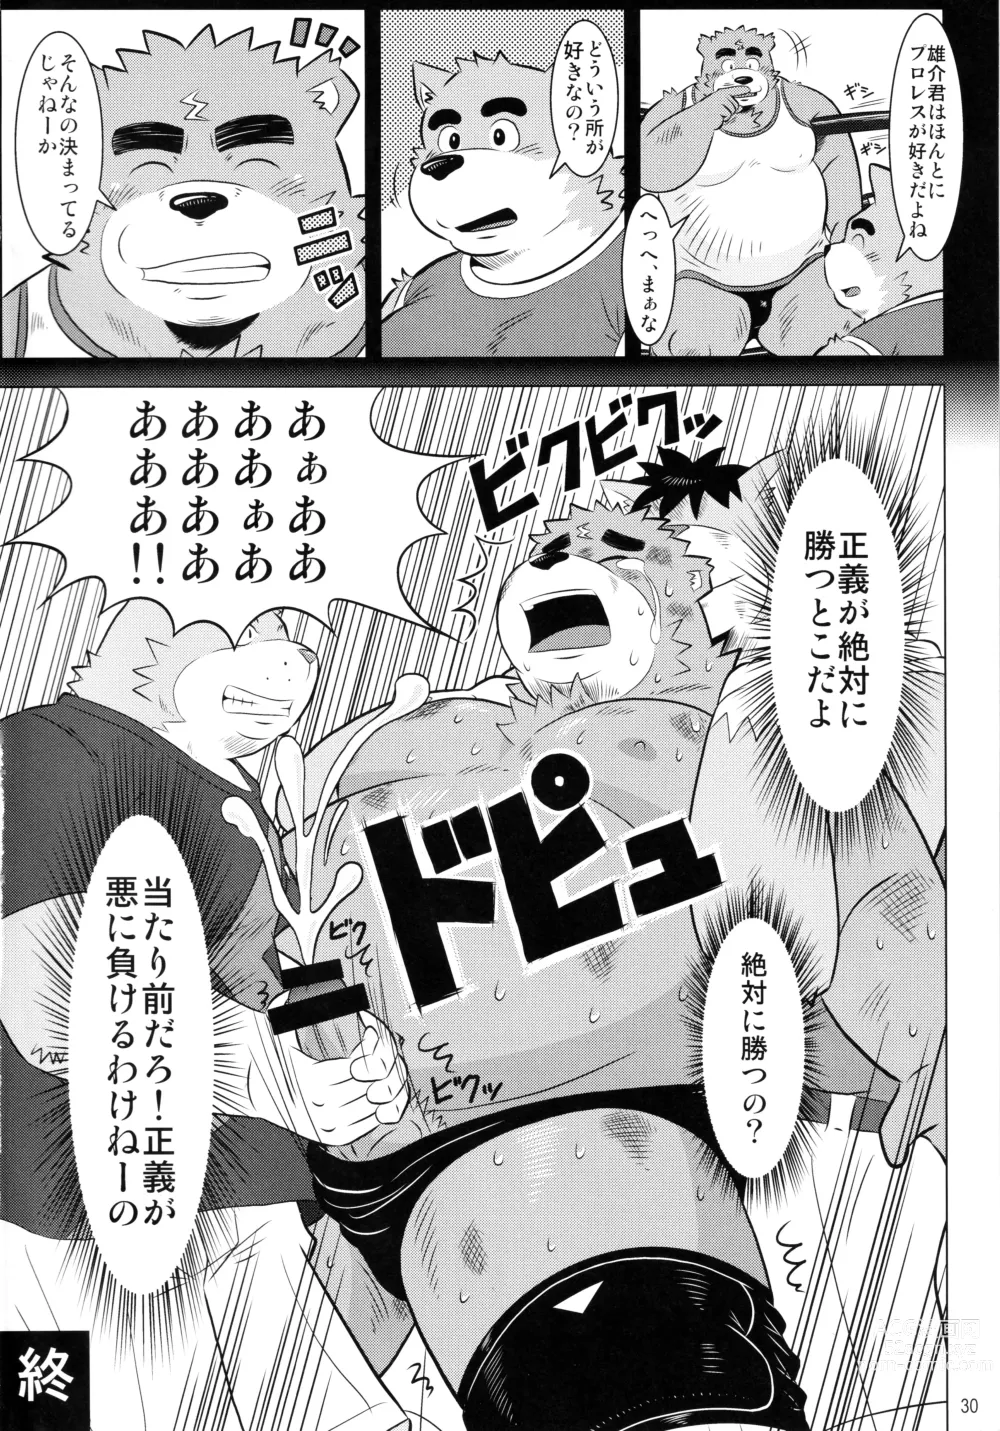 Page 31 of doujinshi BFW -BEAST FIGHTER WRESTLING-